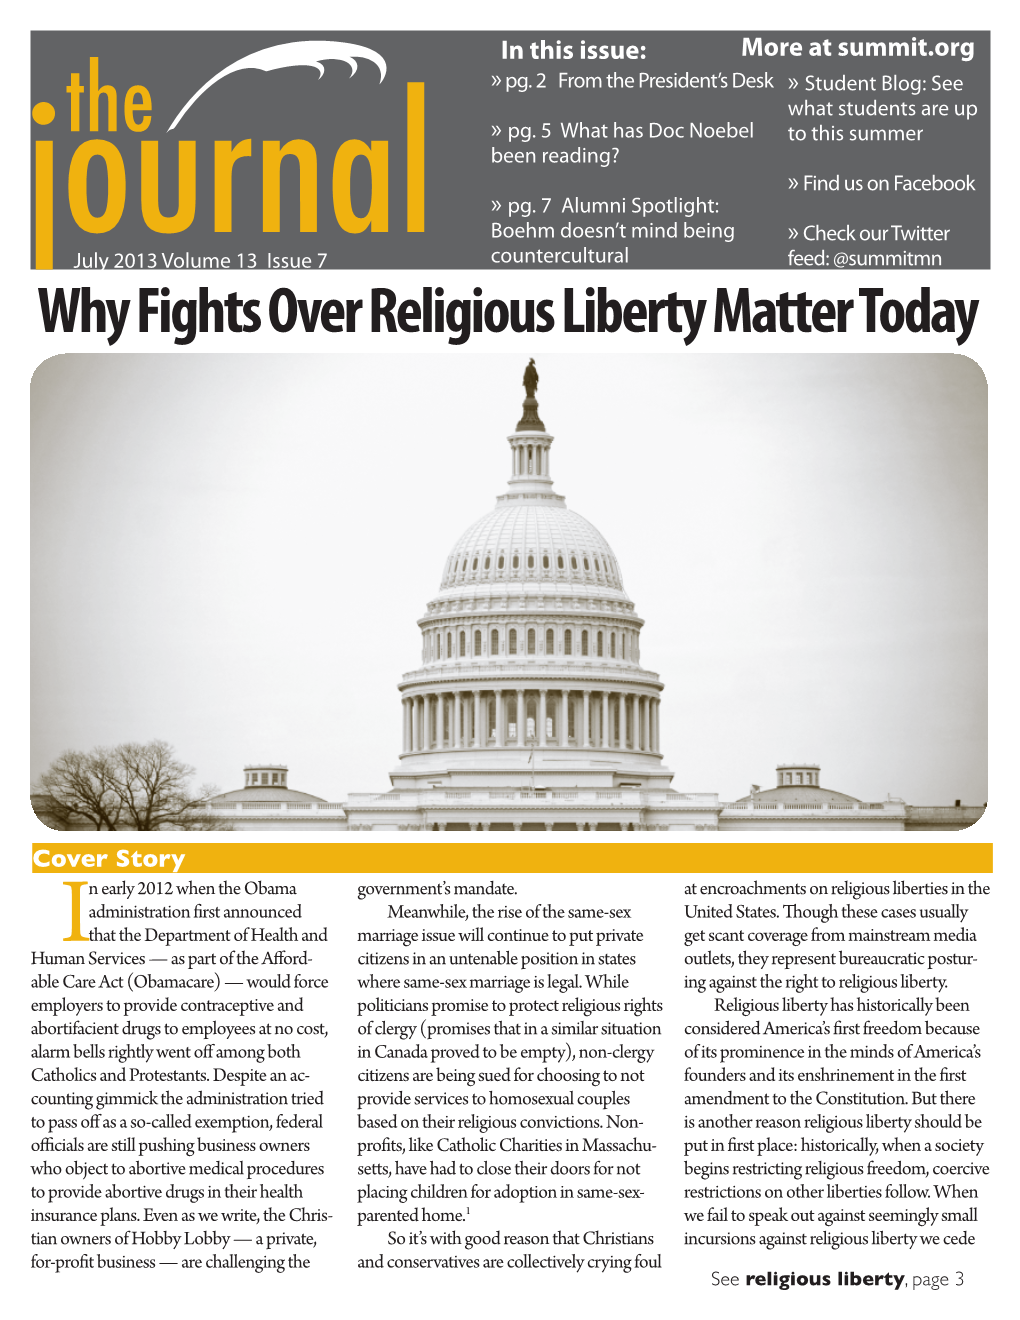 Why Fights Over Religious Liberty Matter Today